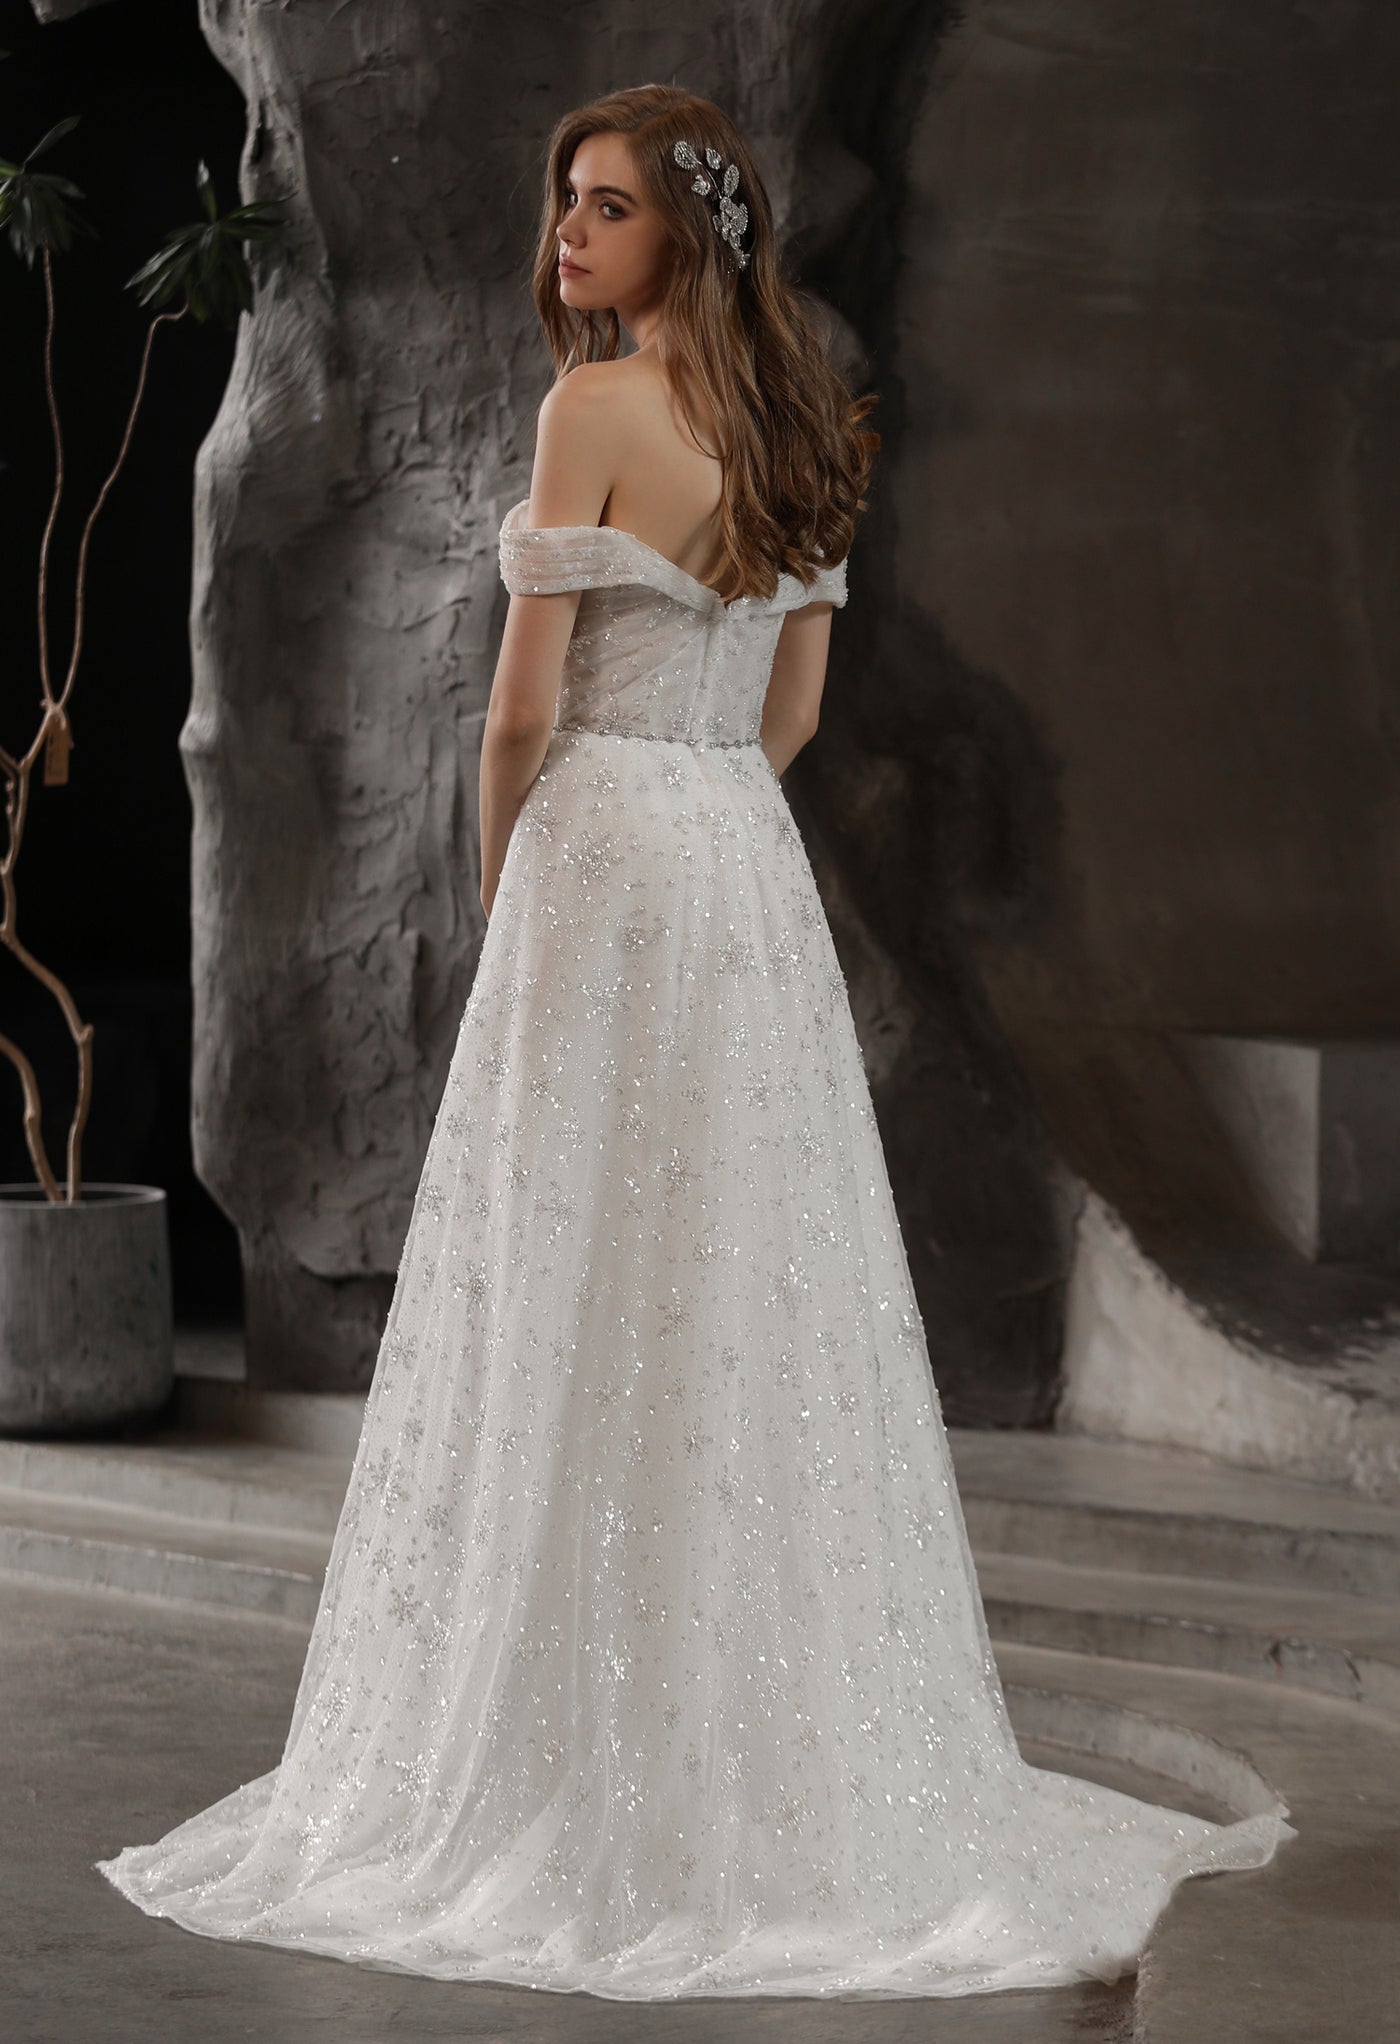 Sparkly Beaded A-Line Bridal Gown With Off the Shoulder Sweetheart Neckline